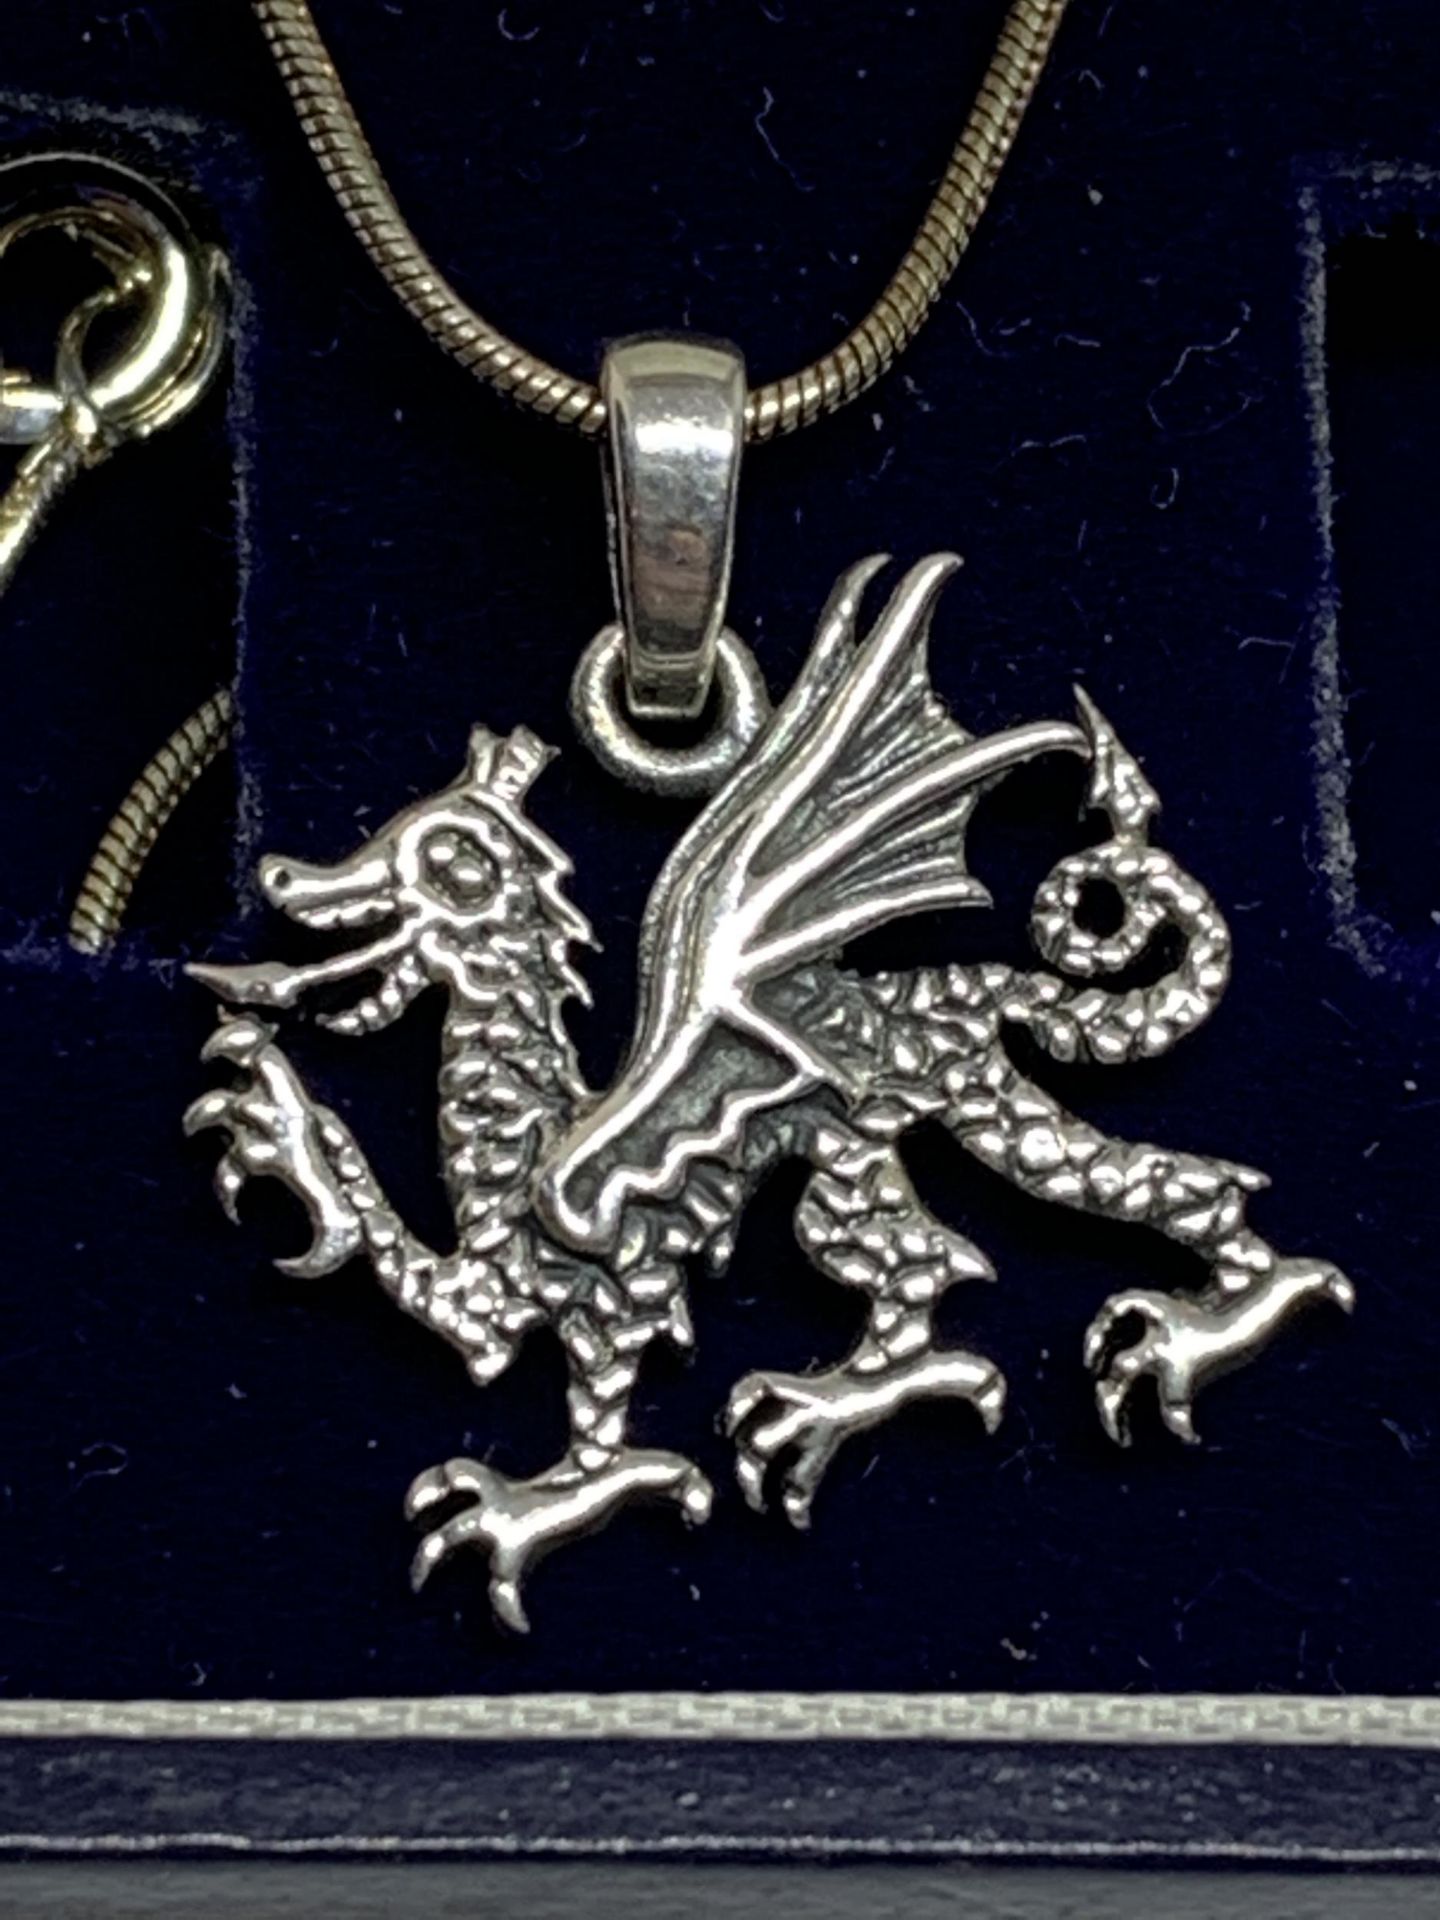 A WELSH DRAGON NECKLACE IN A PRESENTATION BOX - Image 2 of 2